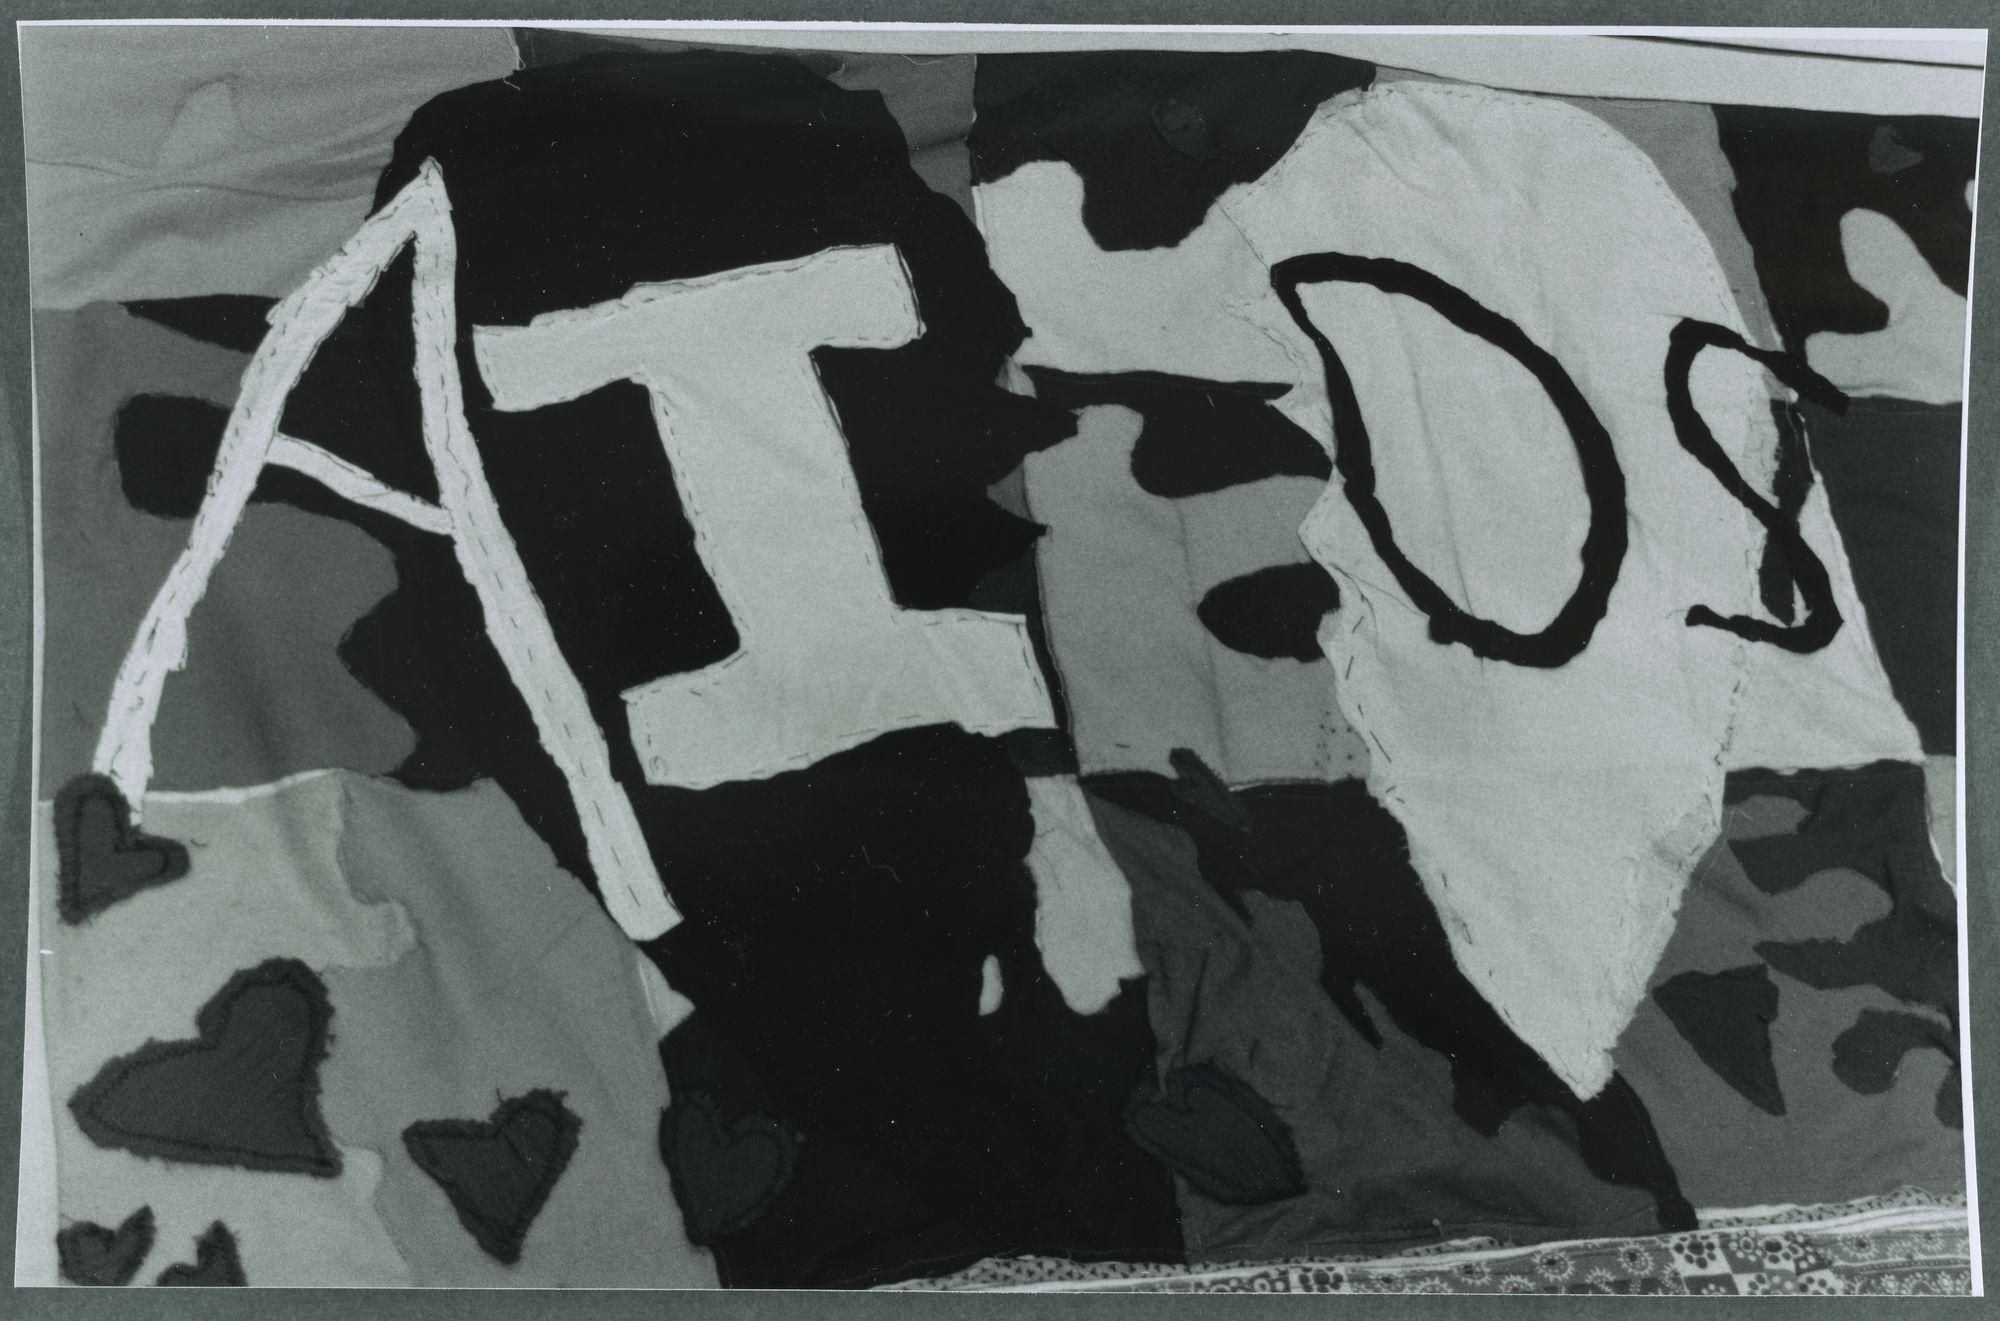 A panel of the AIDS quilt with irregularly-shaped letters spelling "AIDS."